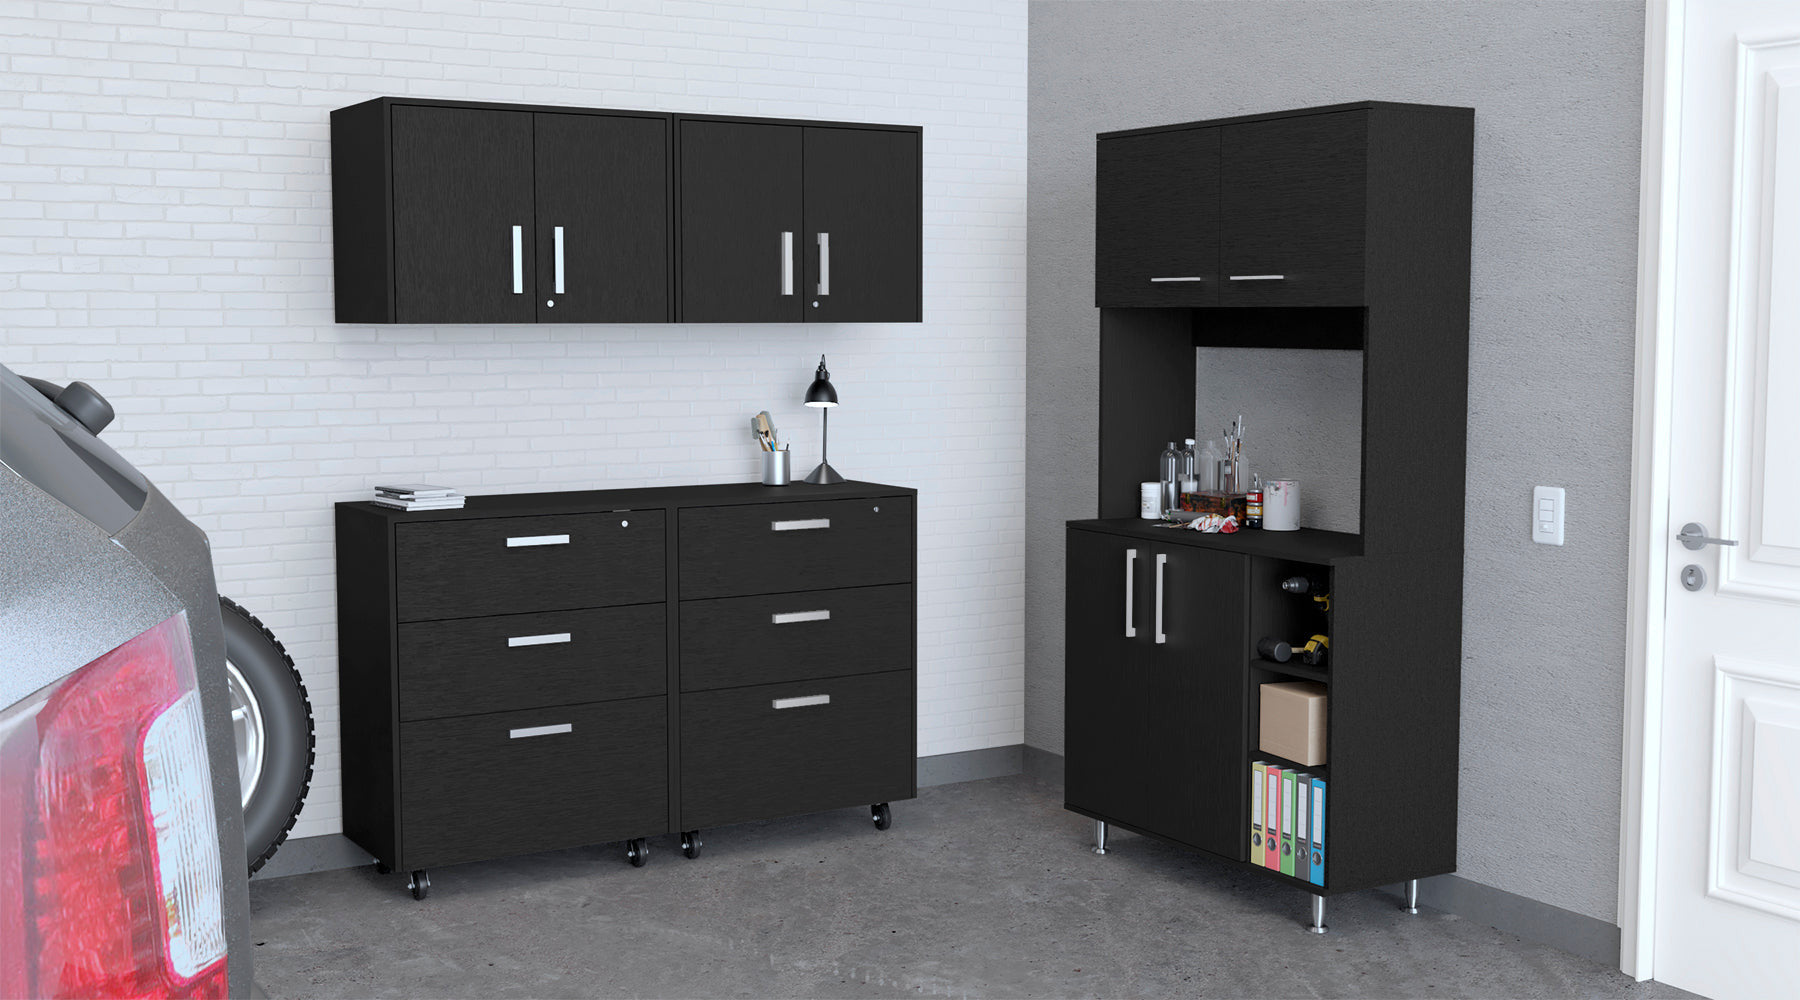 28" Black Wall mounted Accent Cabinet With Seven Shelves And Six Drawers